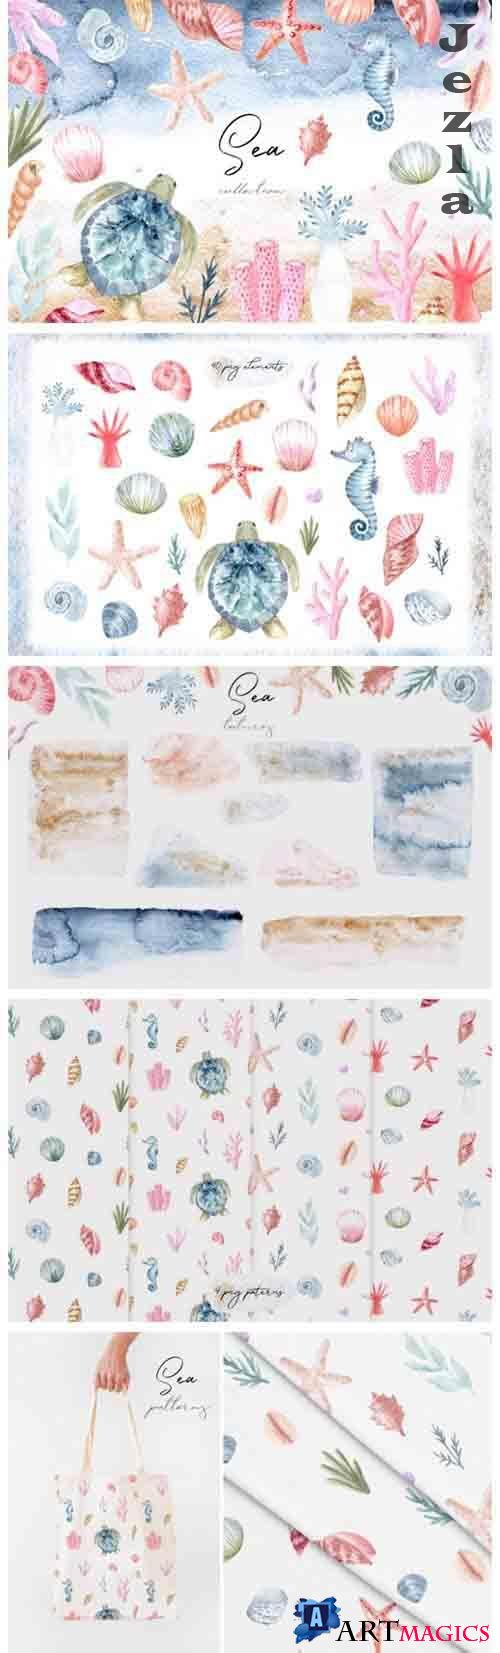 Watercolor Sea Collection. Patterns - 3826587